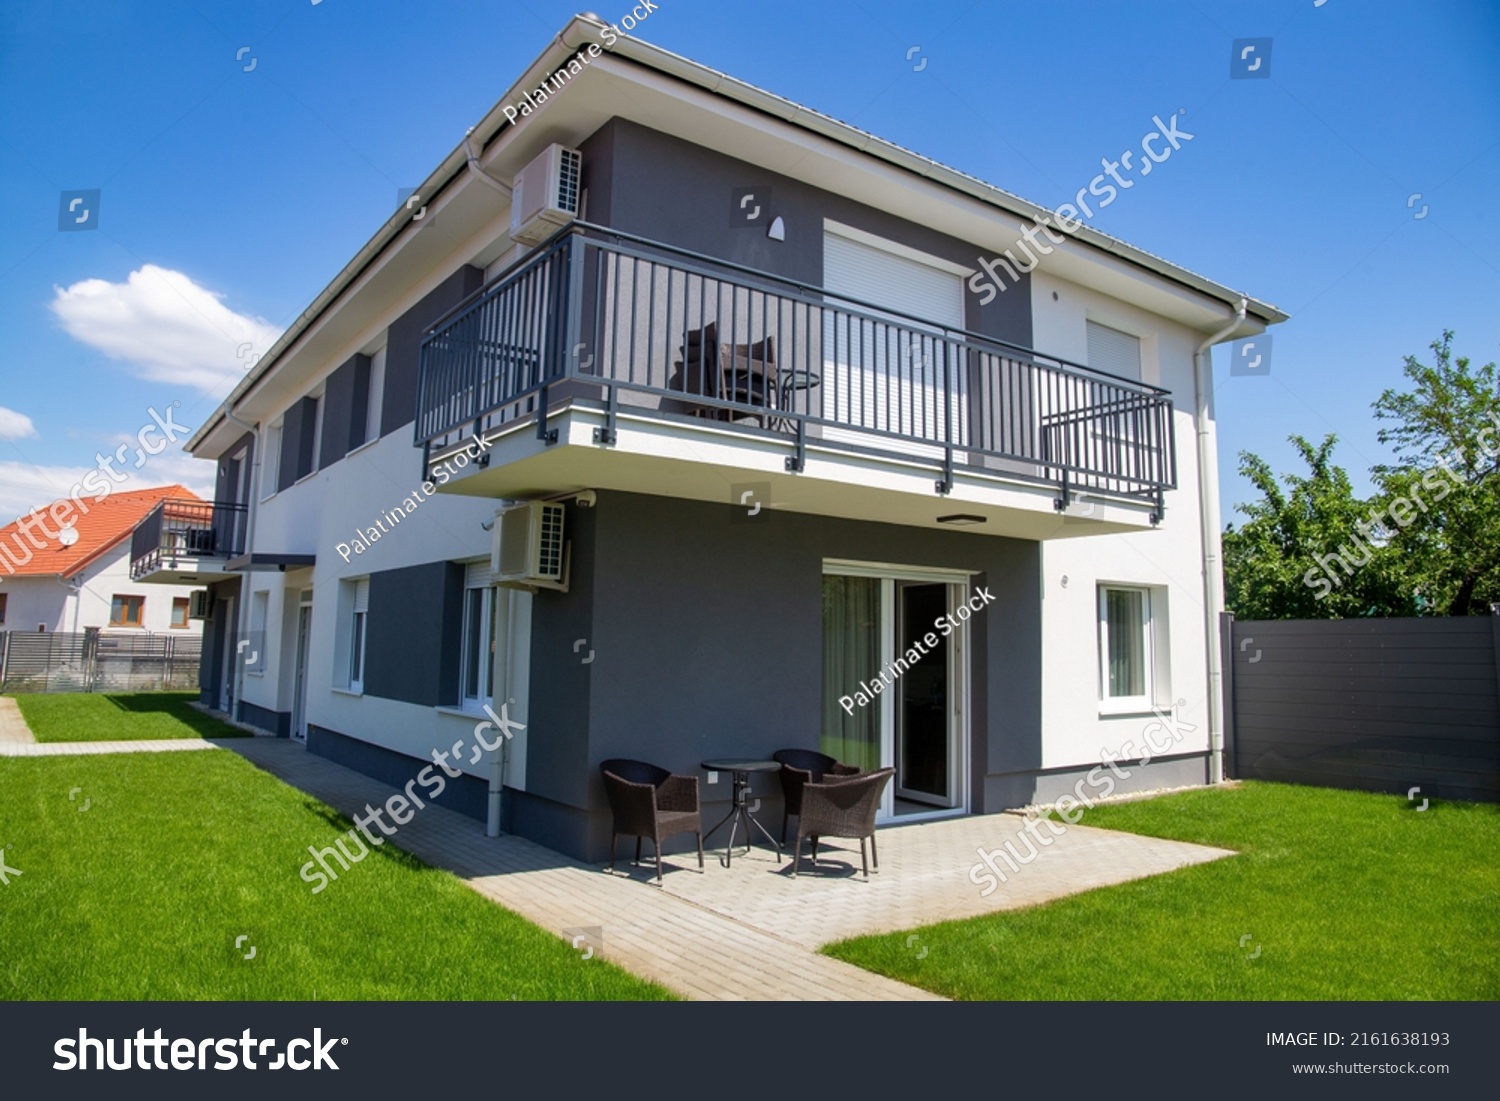 Symbol image single family house: New residential house in front of blue sky #2161638193